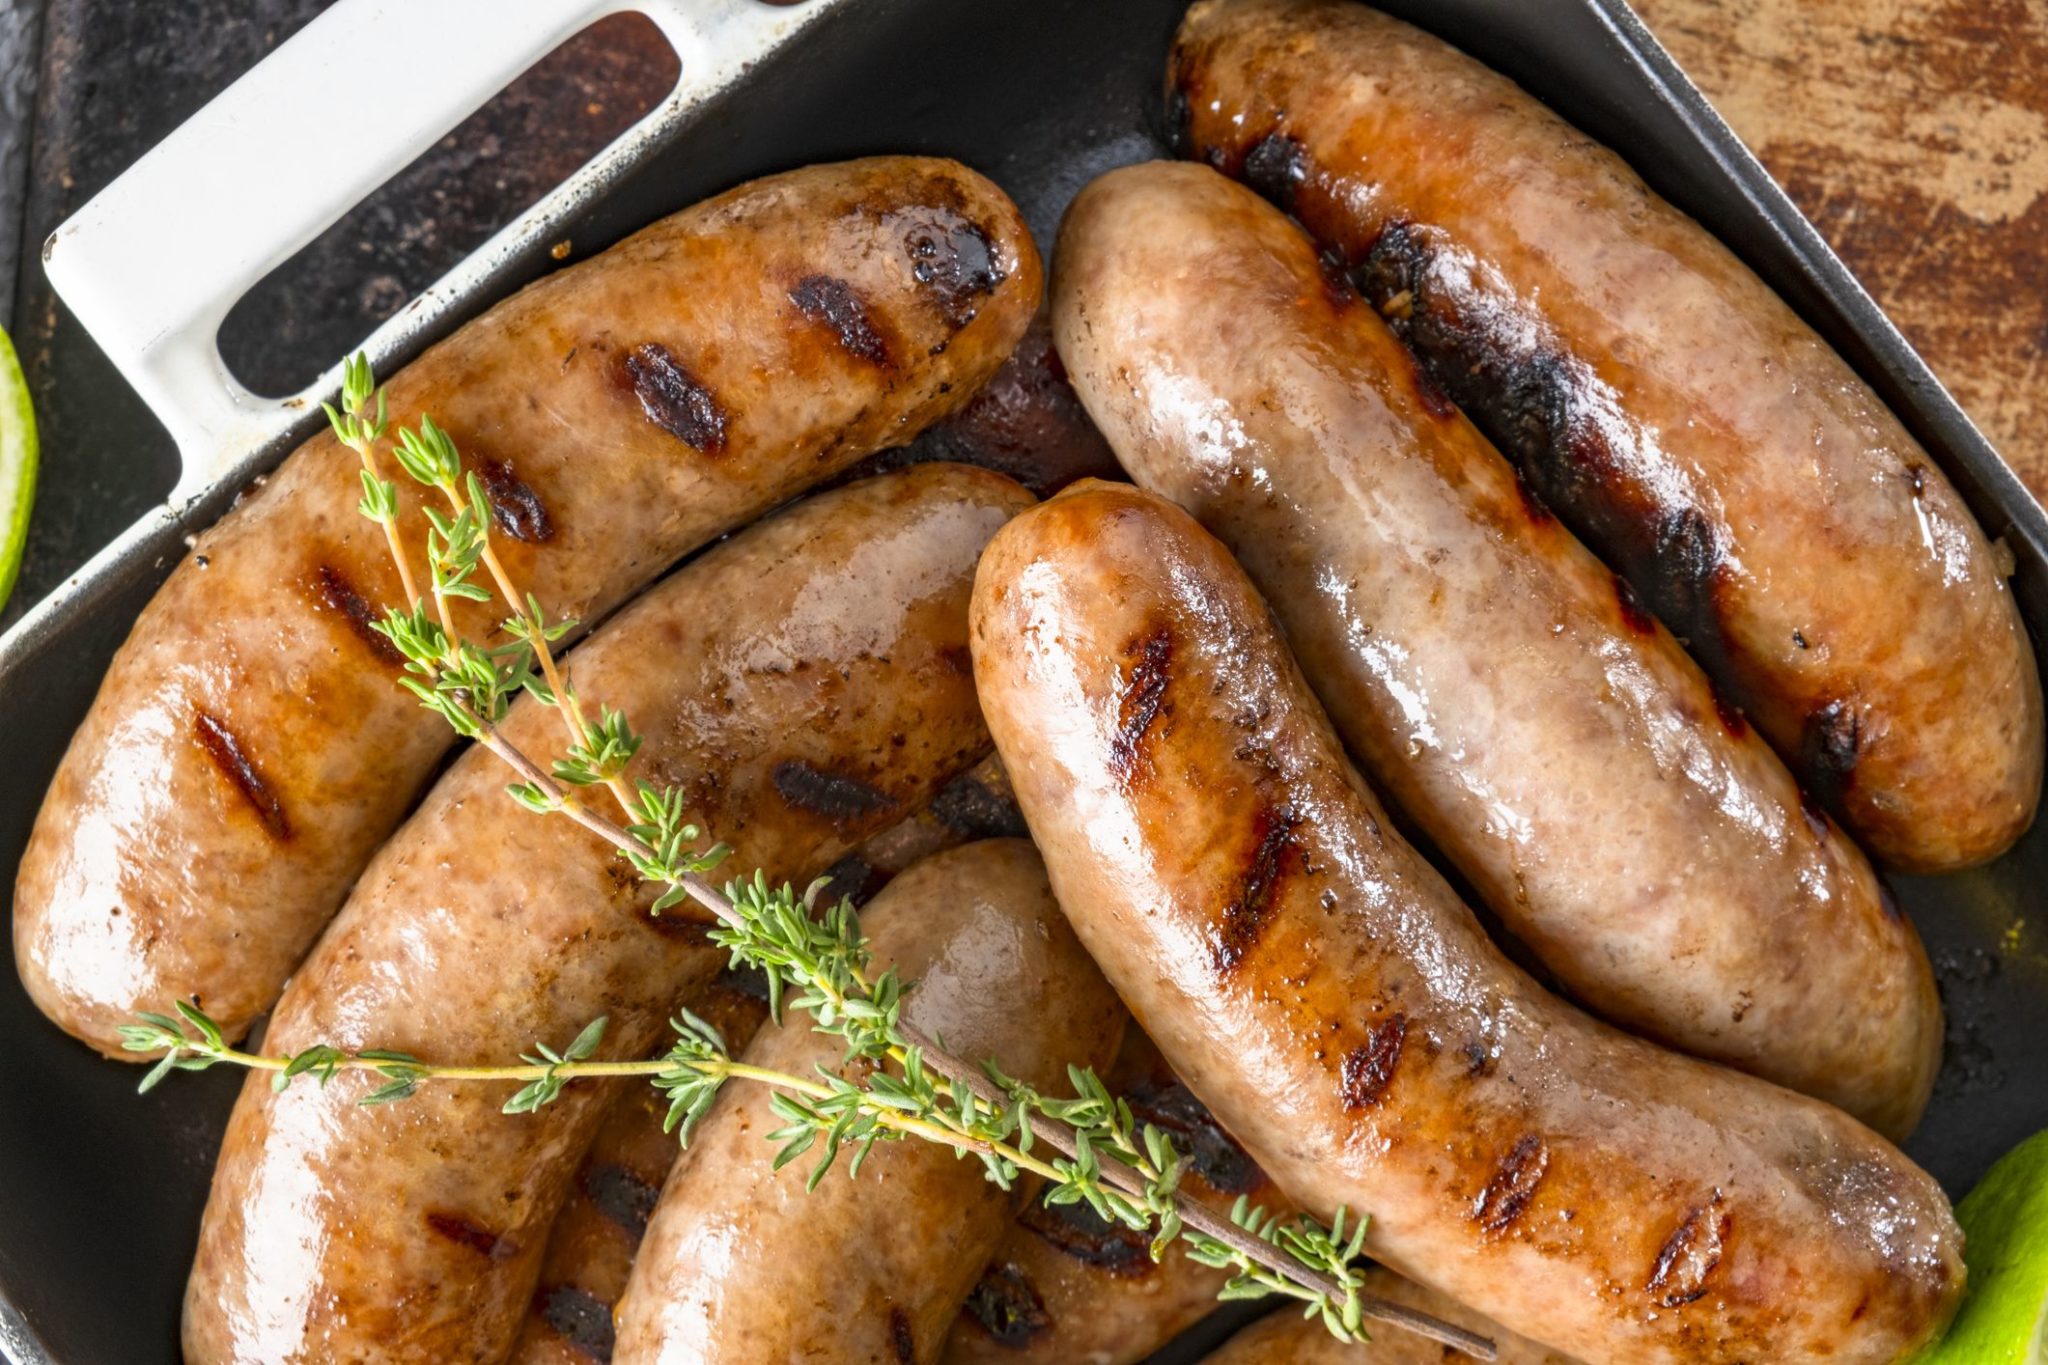 How to cook Bratwurst dinner and Bangers and Mash - BBQ's Algarve